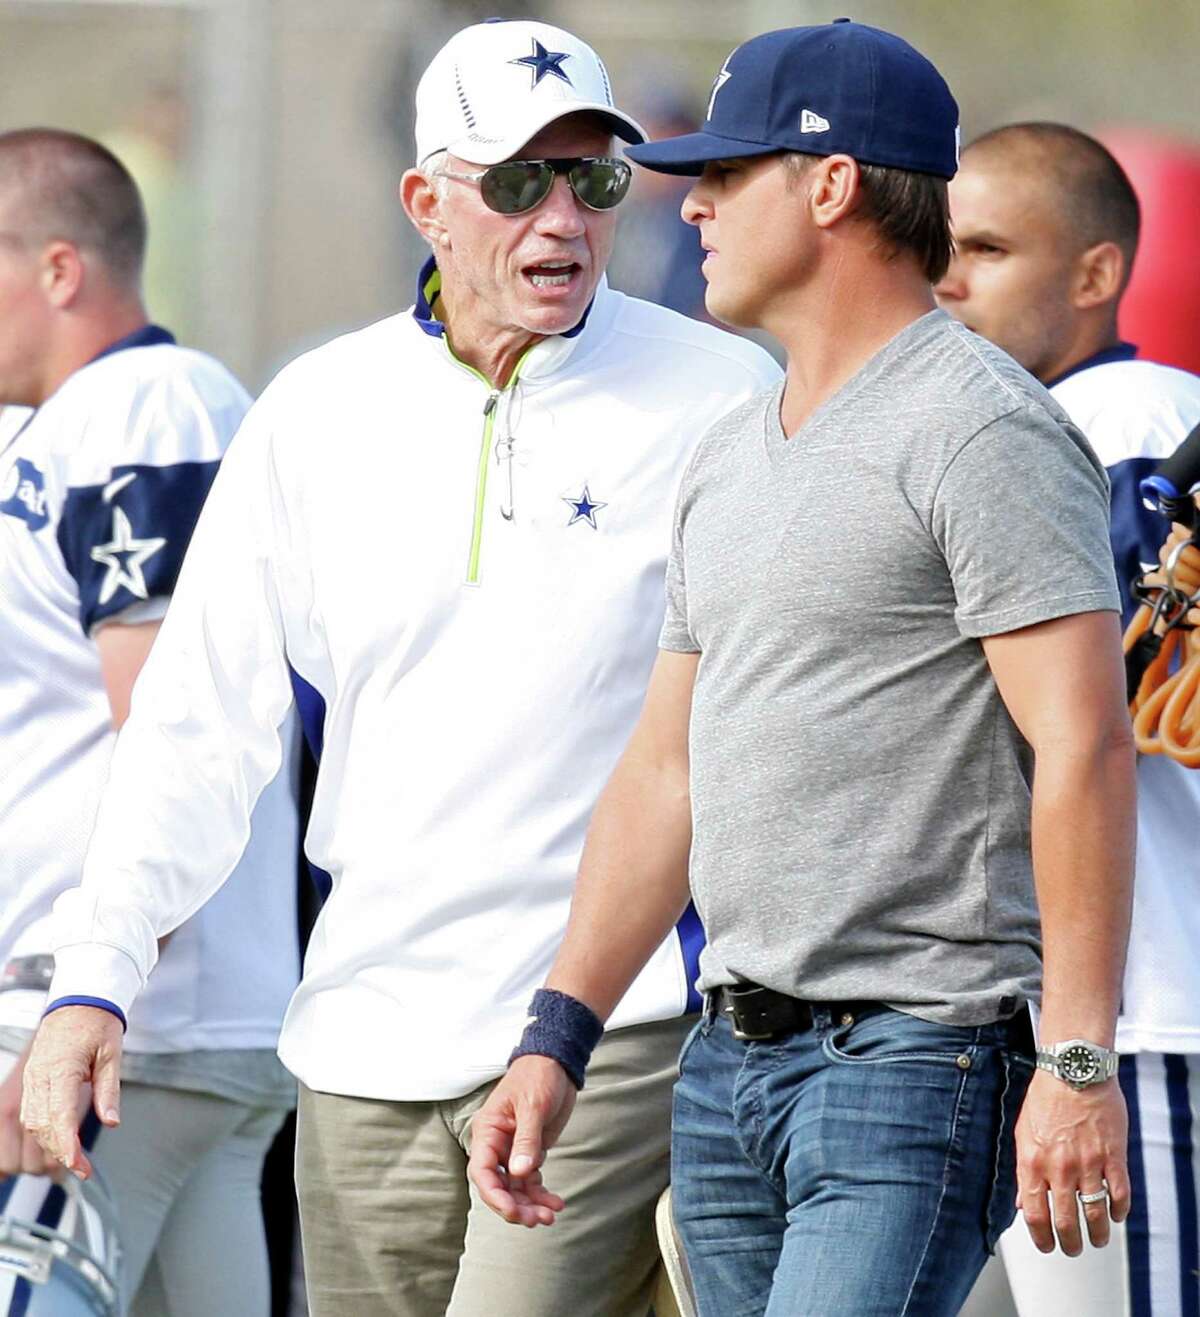 Dallas Cowboys owner Jerry Jones (left) talks with actor George Eads during 2012 training camp held Wednesday Aug 1, 2012 in Oxnard, CA.